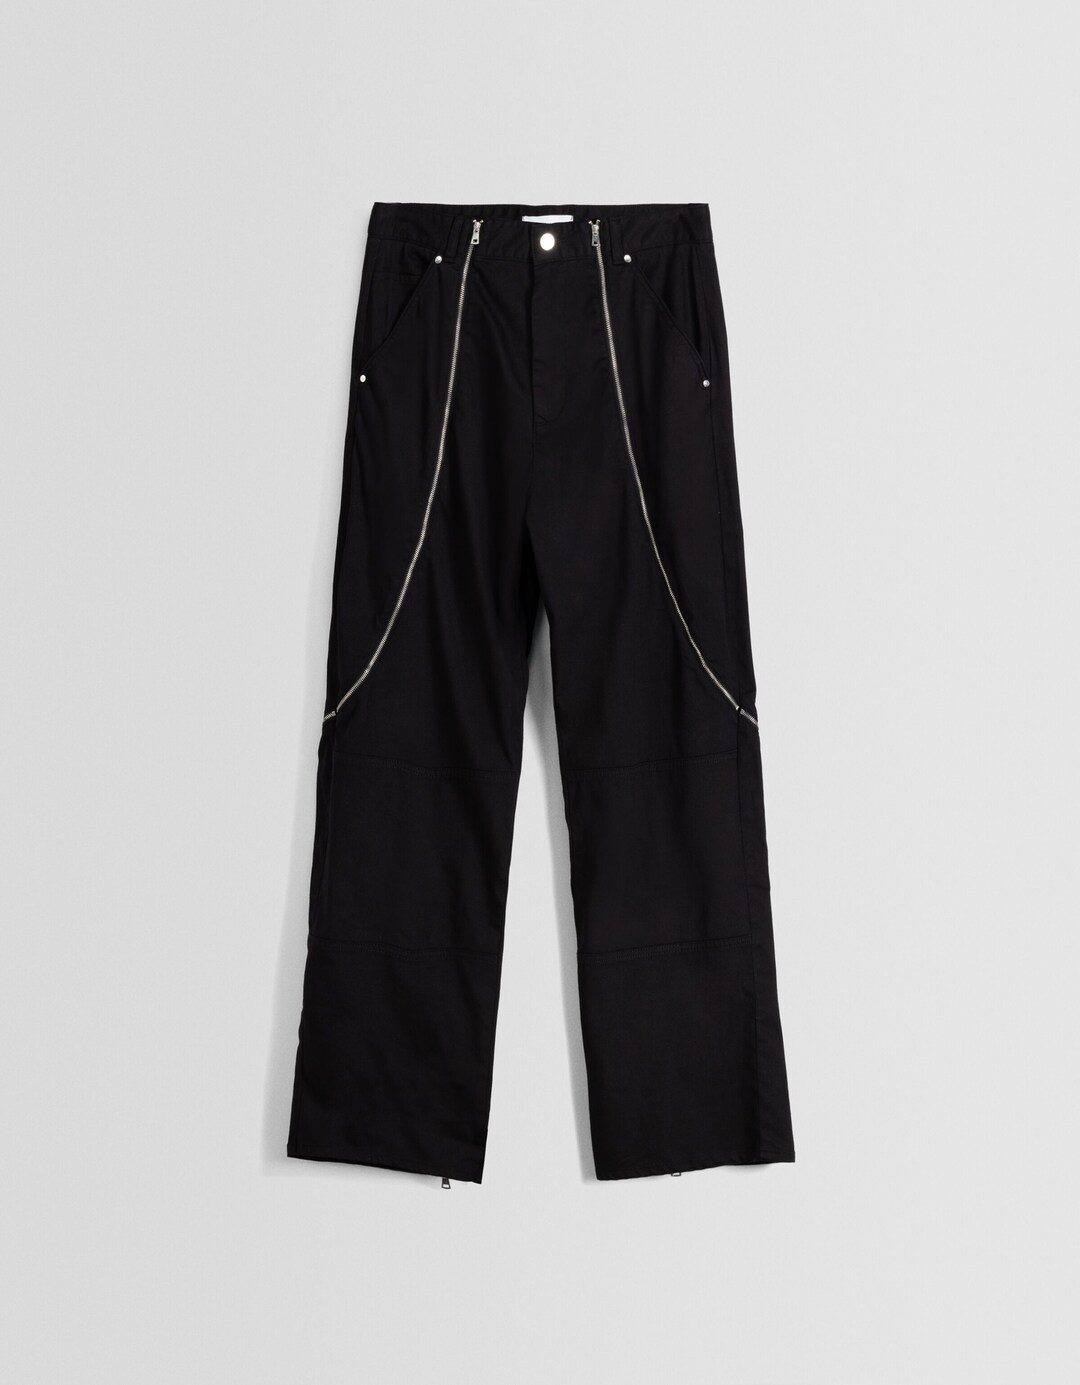 Baggy pants with zippers